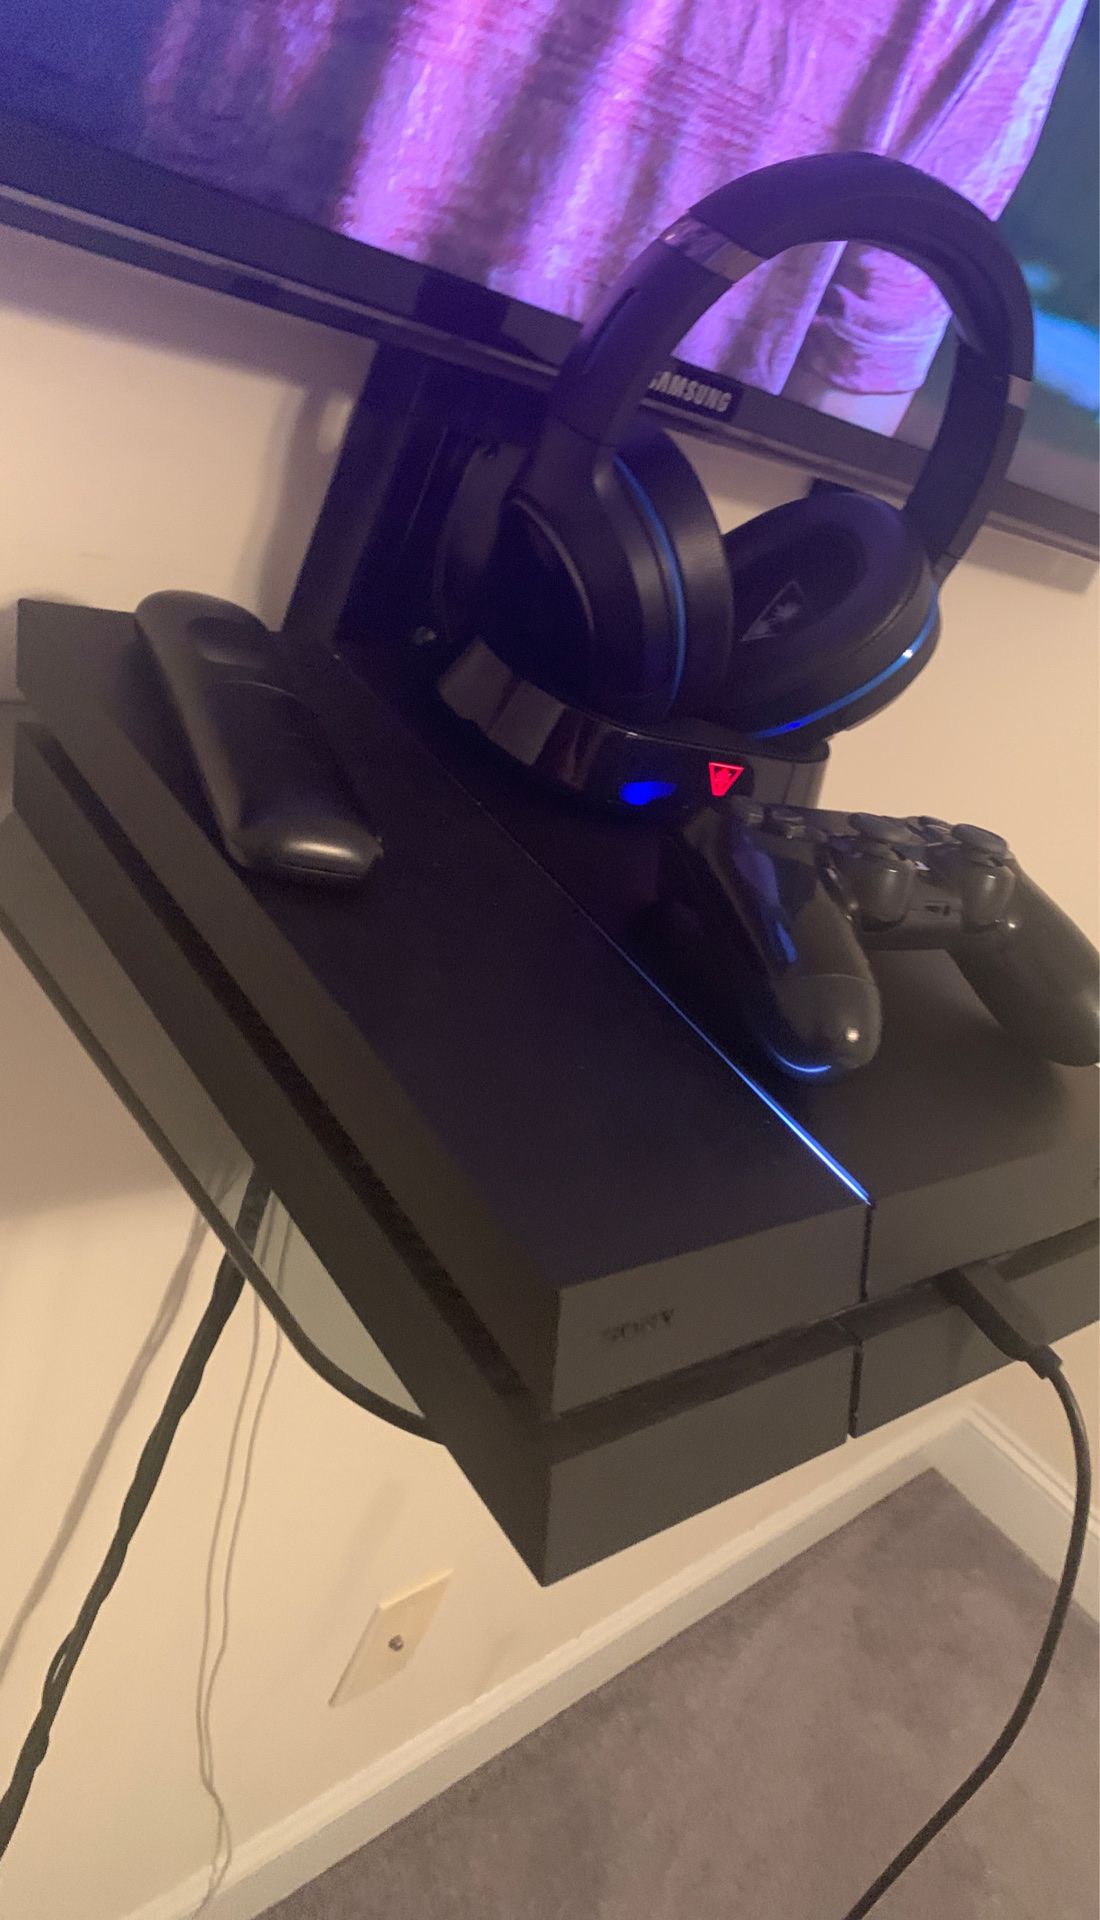 Ps4, Turtle beach headset and ps4 controller